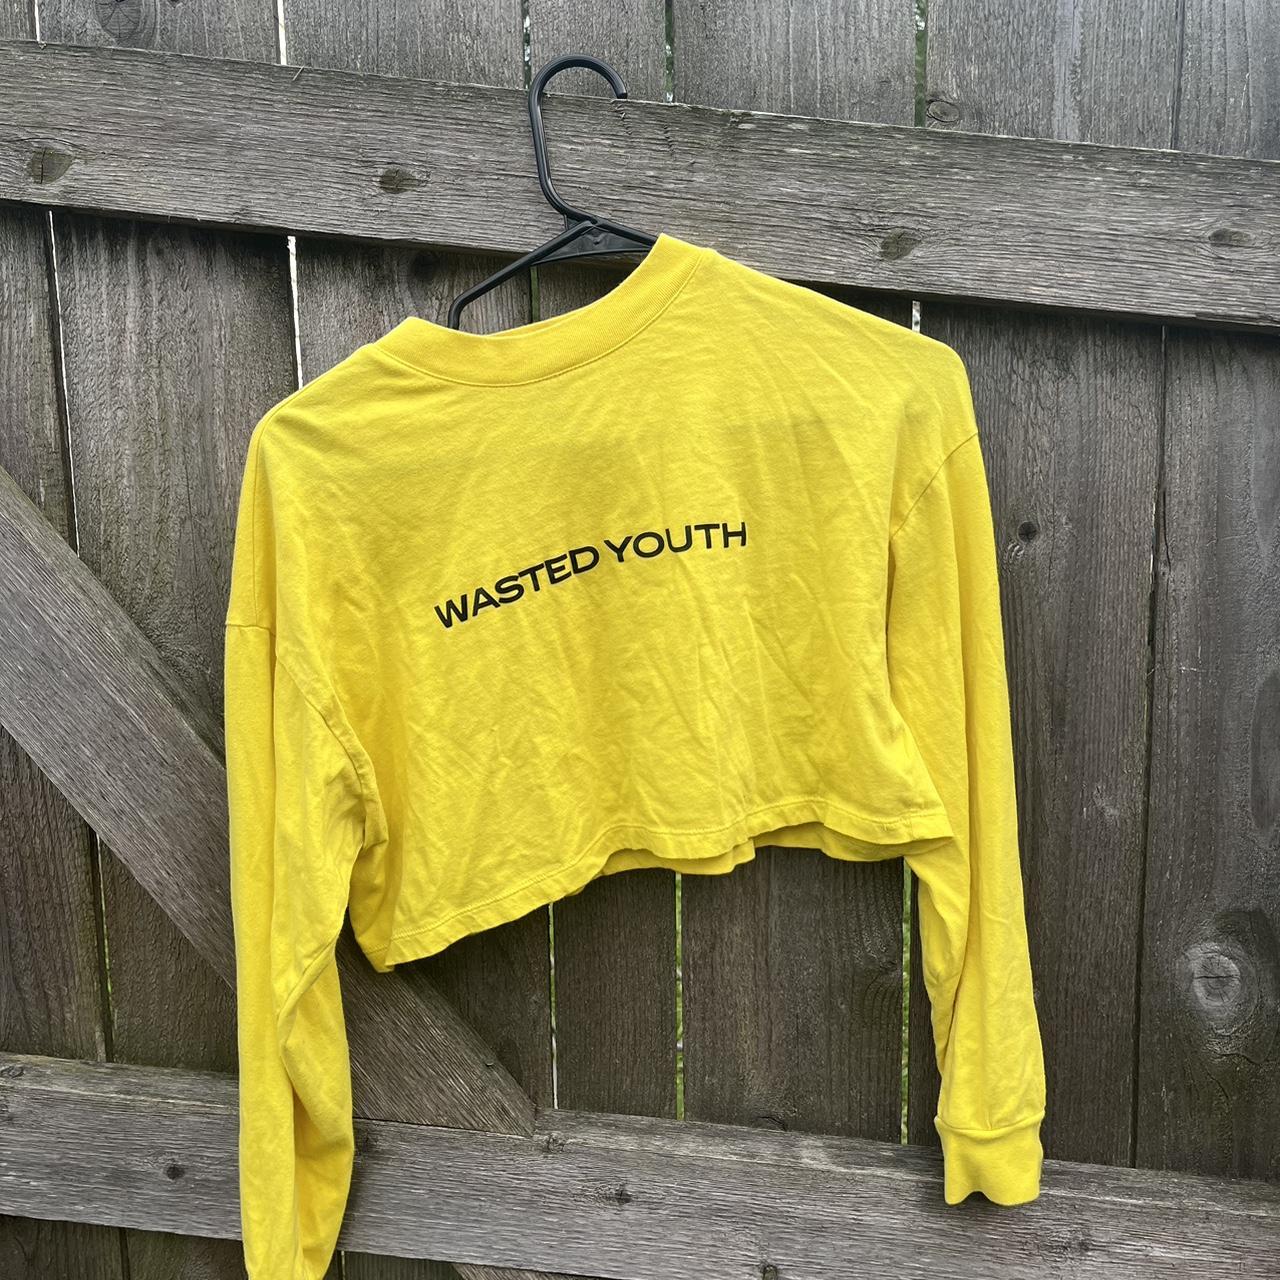 Yellow Tops & Shirts  Women's Yellow Tops Forever 21